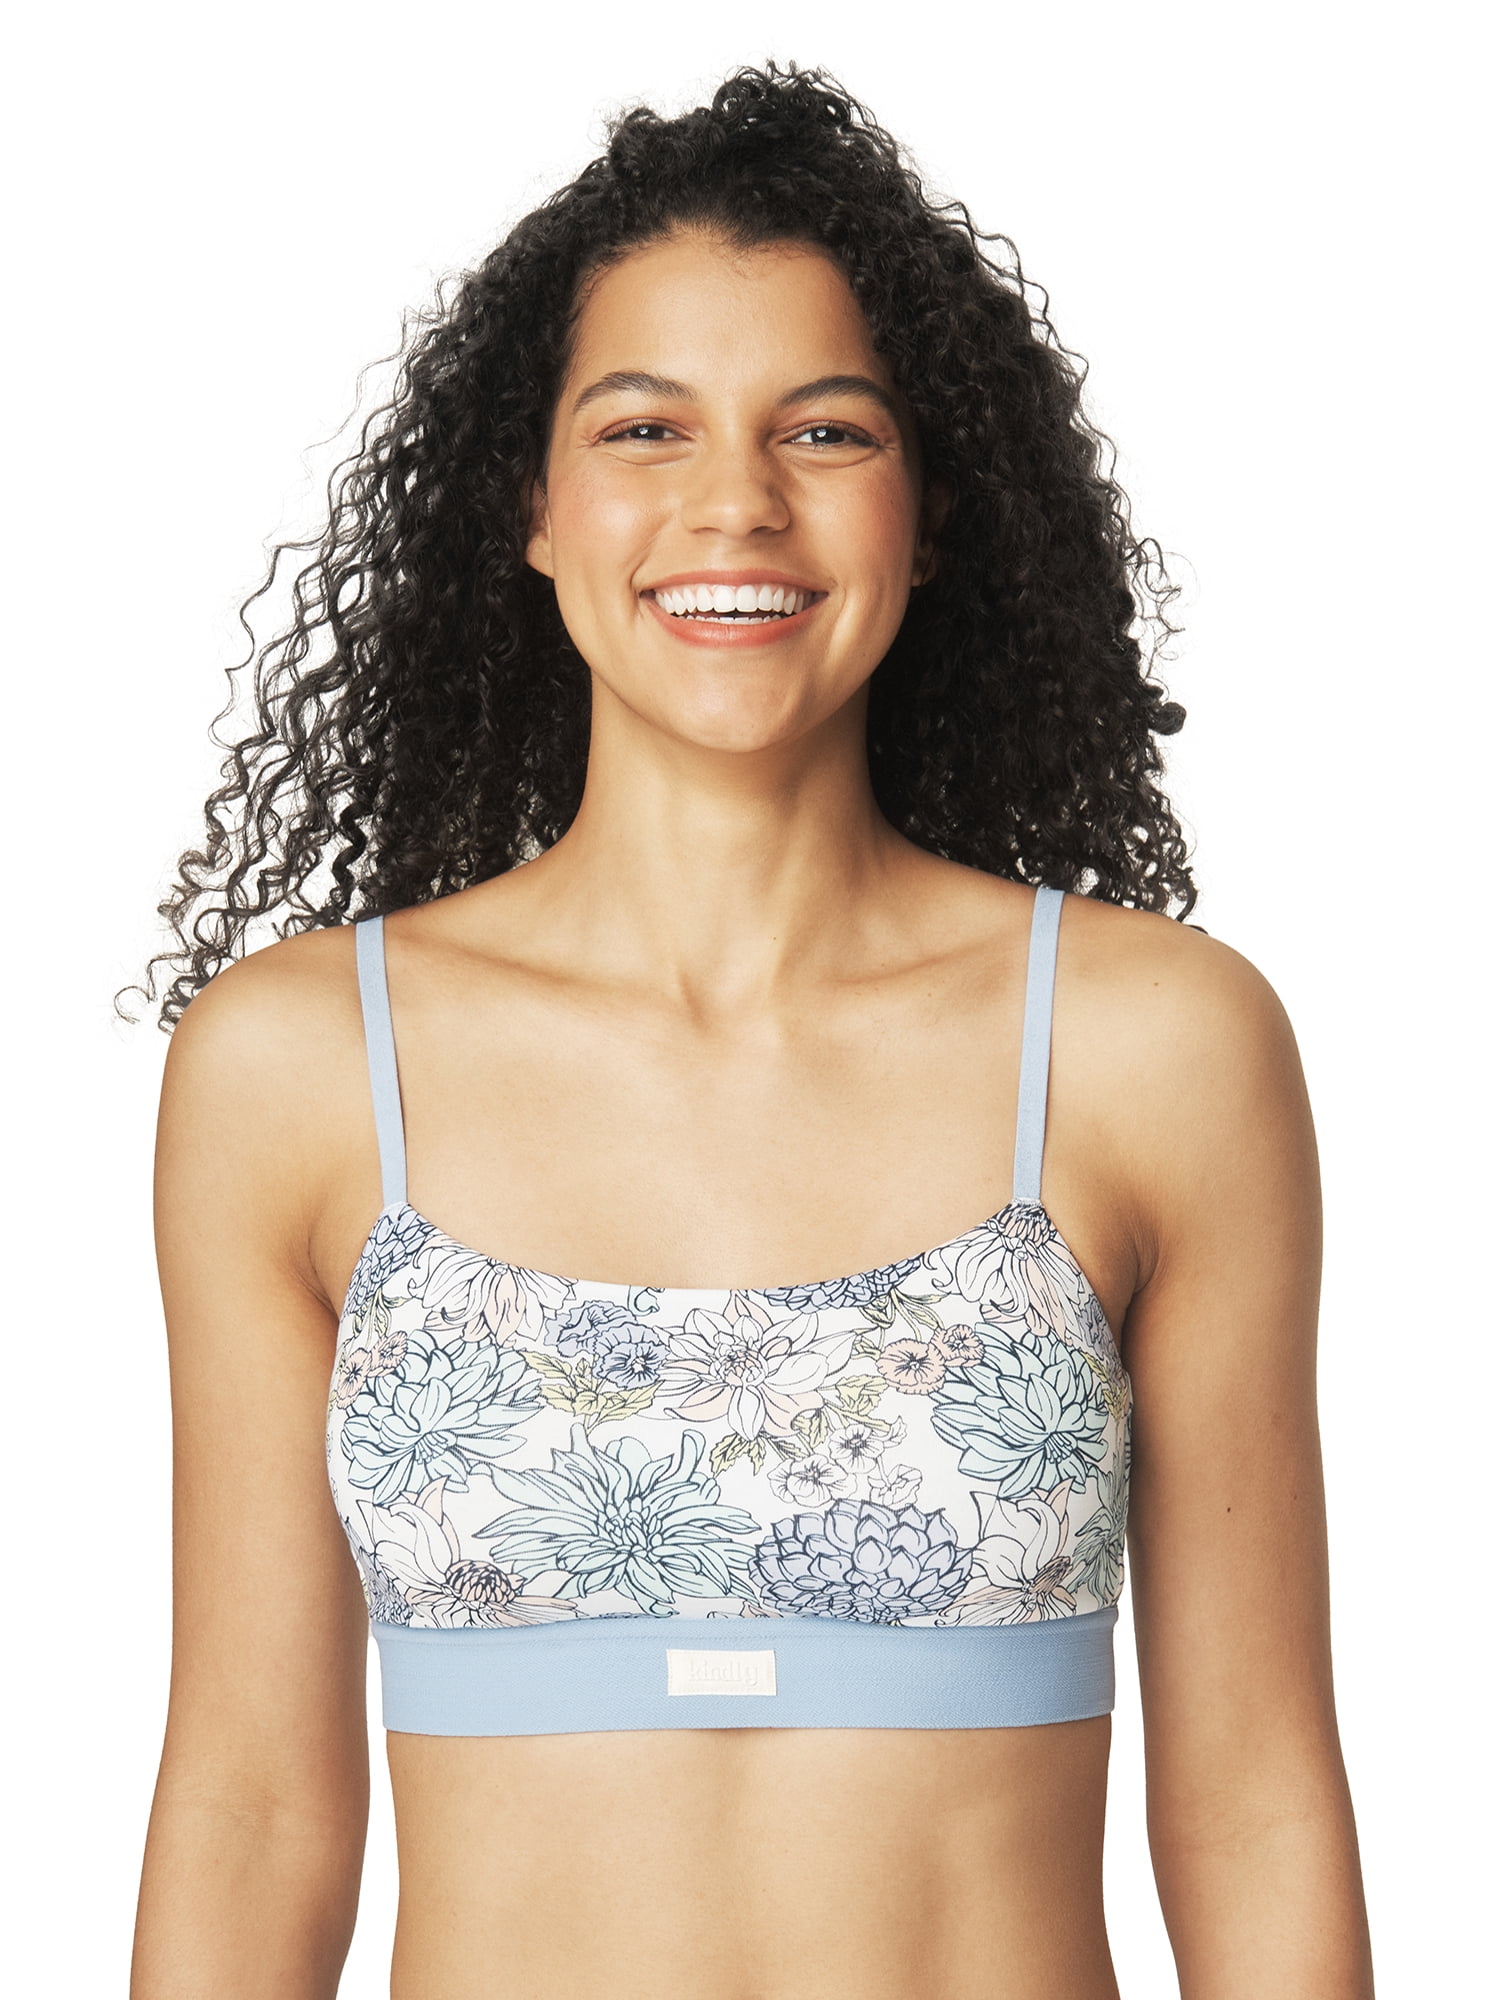 Kindly Yours Women's Sustainable Cotton Adjustable Scoop Bralette 